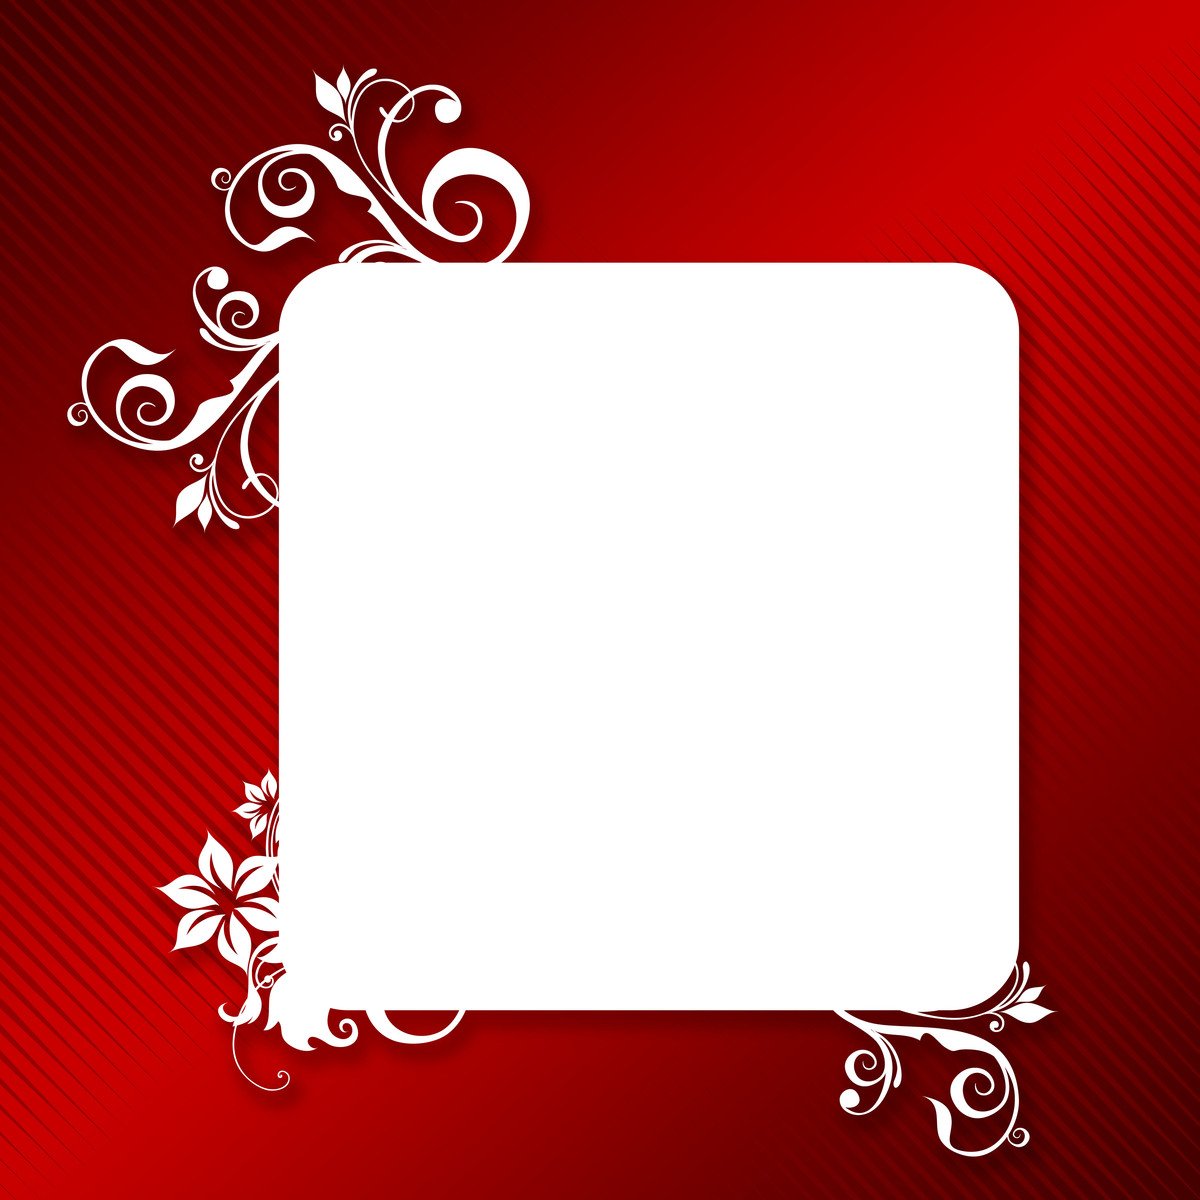 a red and white background with an ornate frame